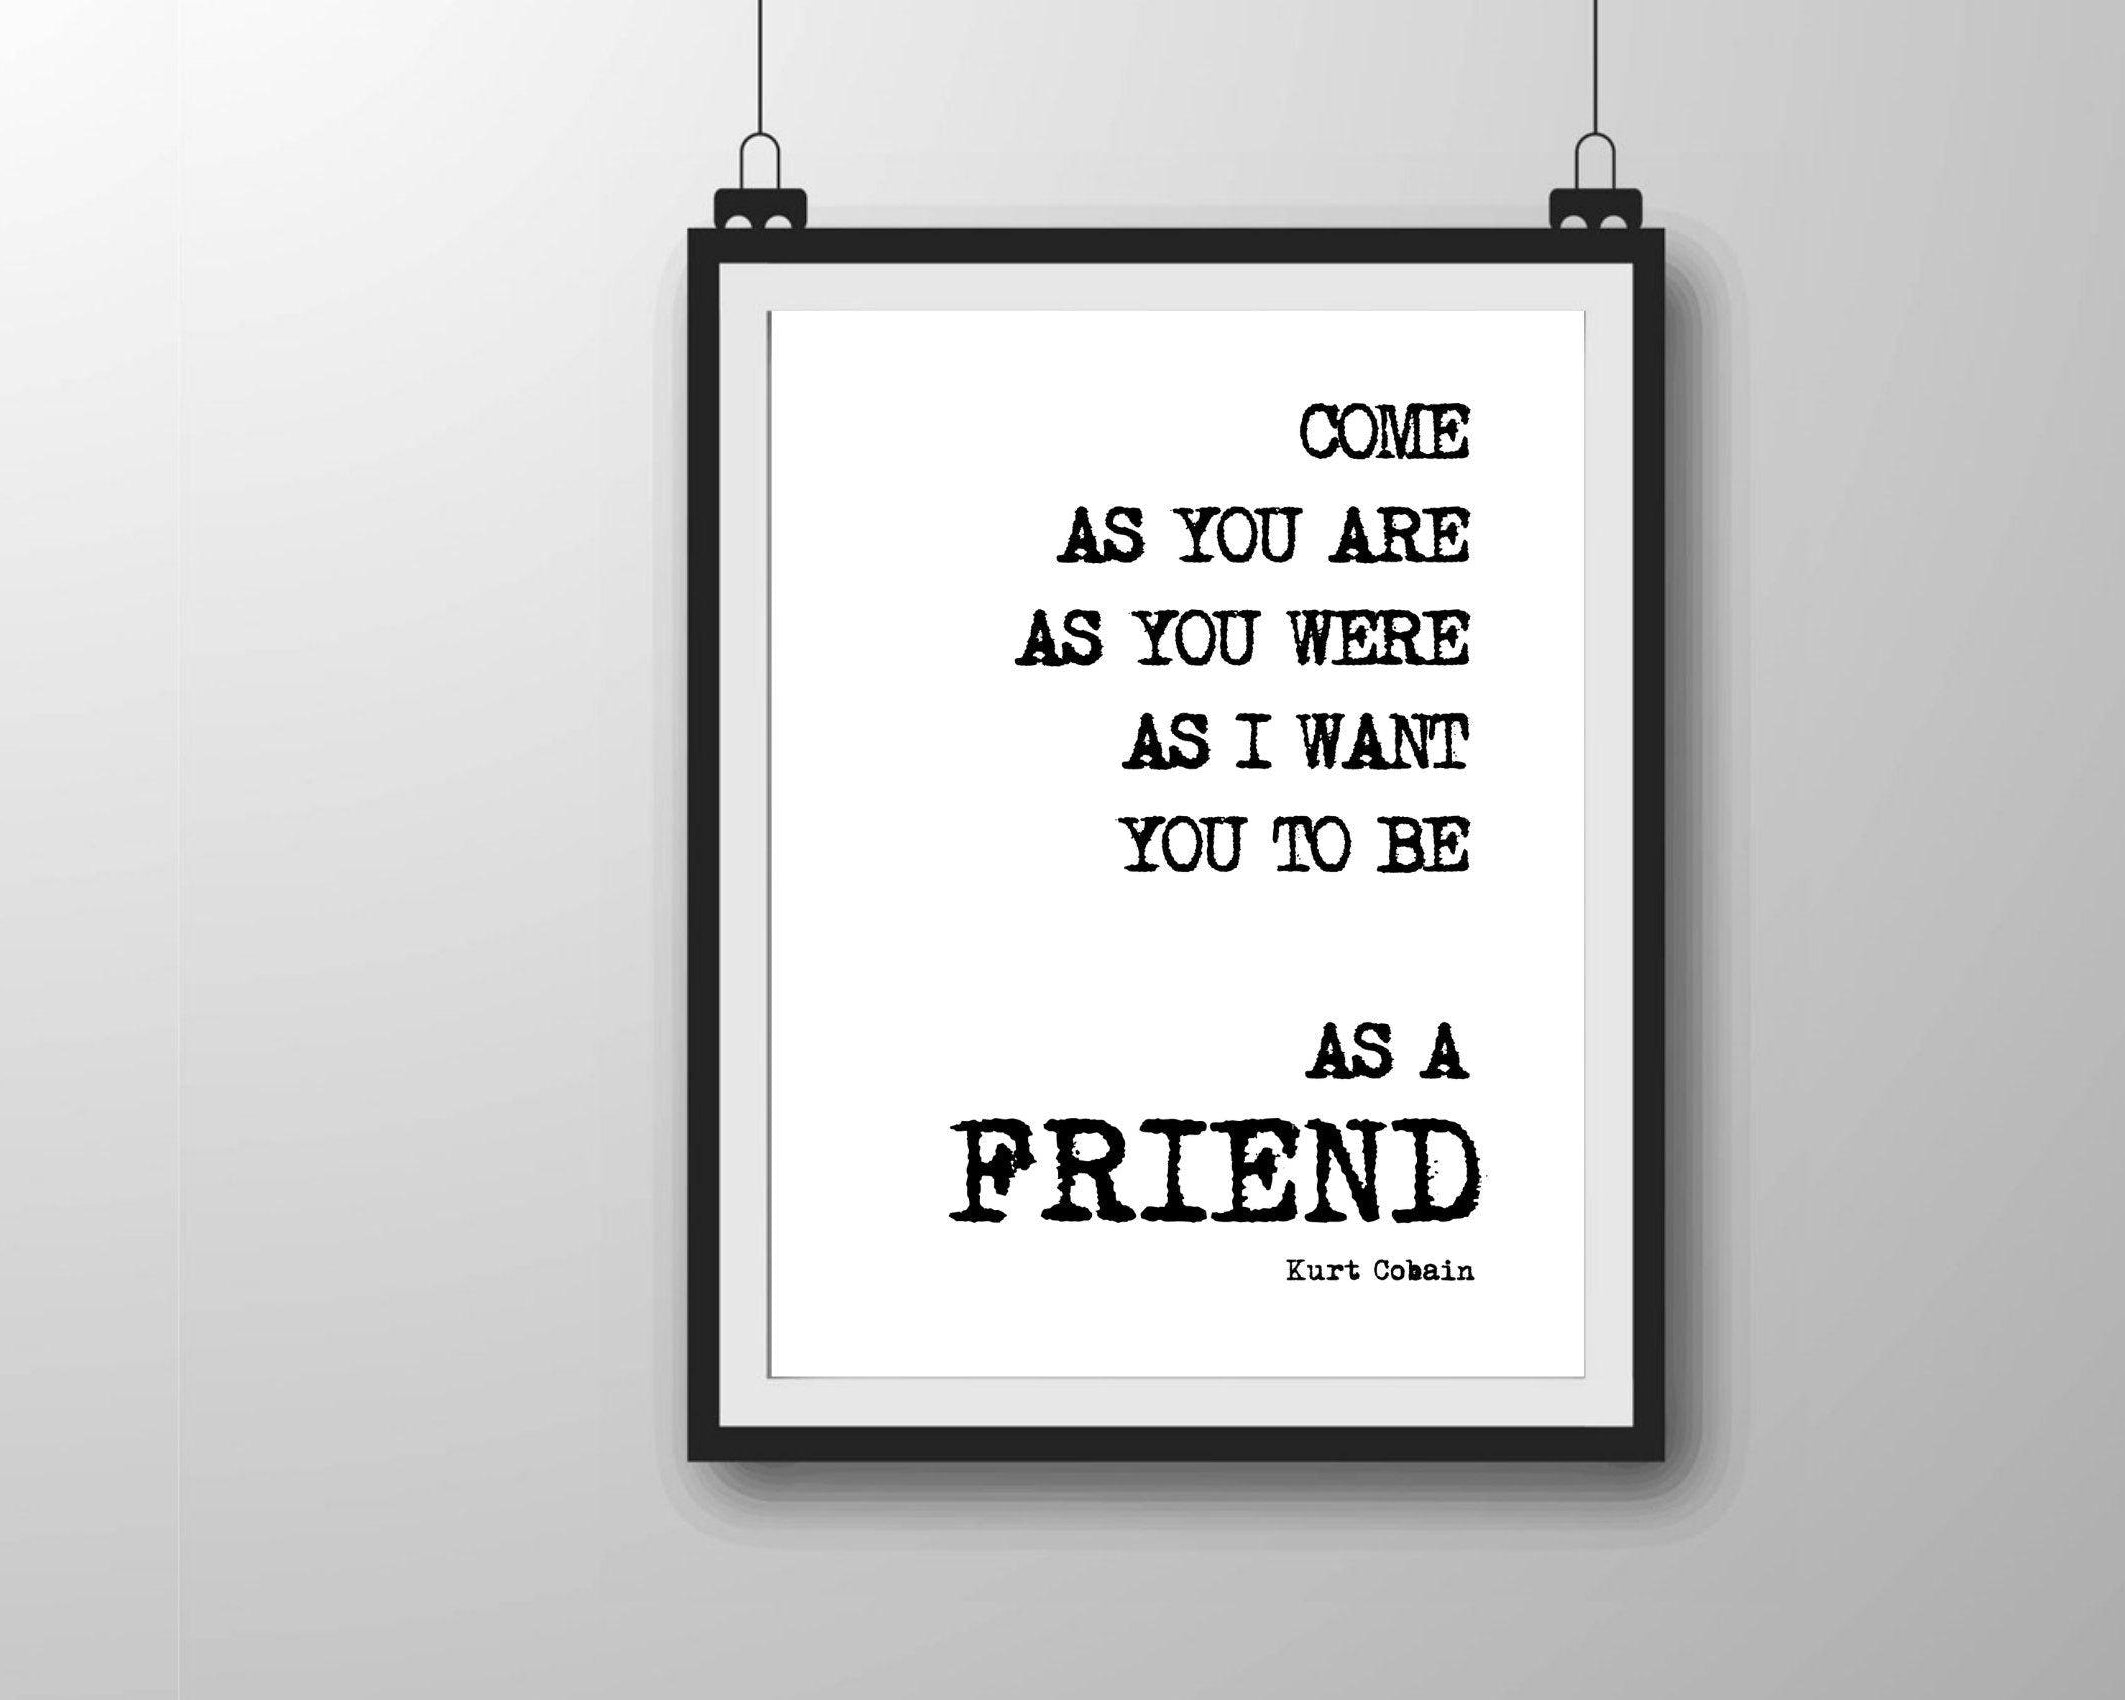 Poster Songtext | Kurt Cobain | Nirvana | Come as you are - Roo's Gift Shop